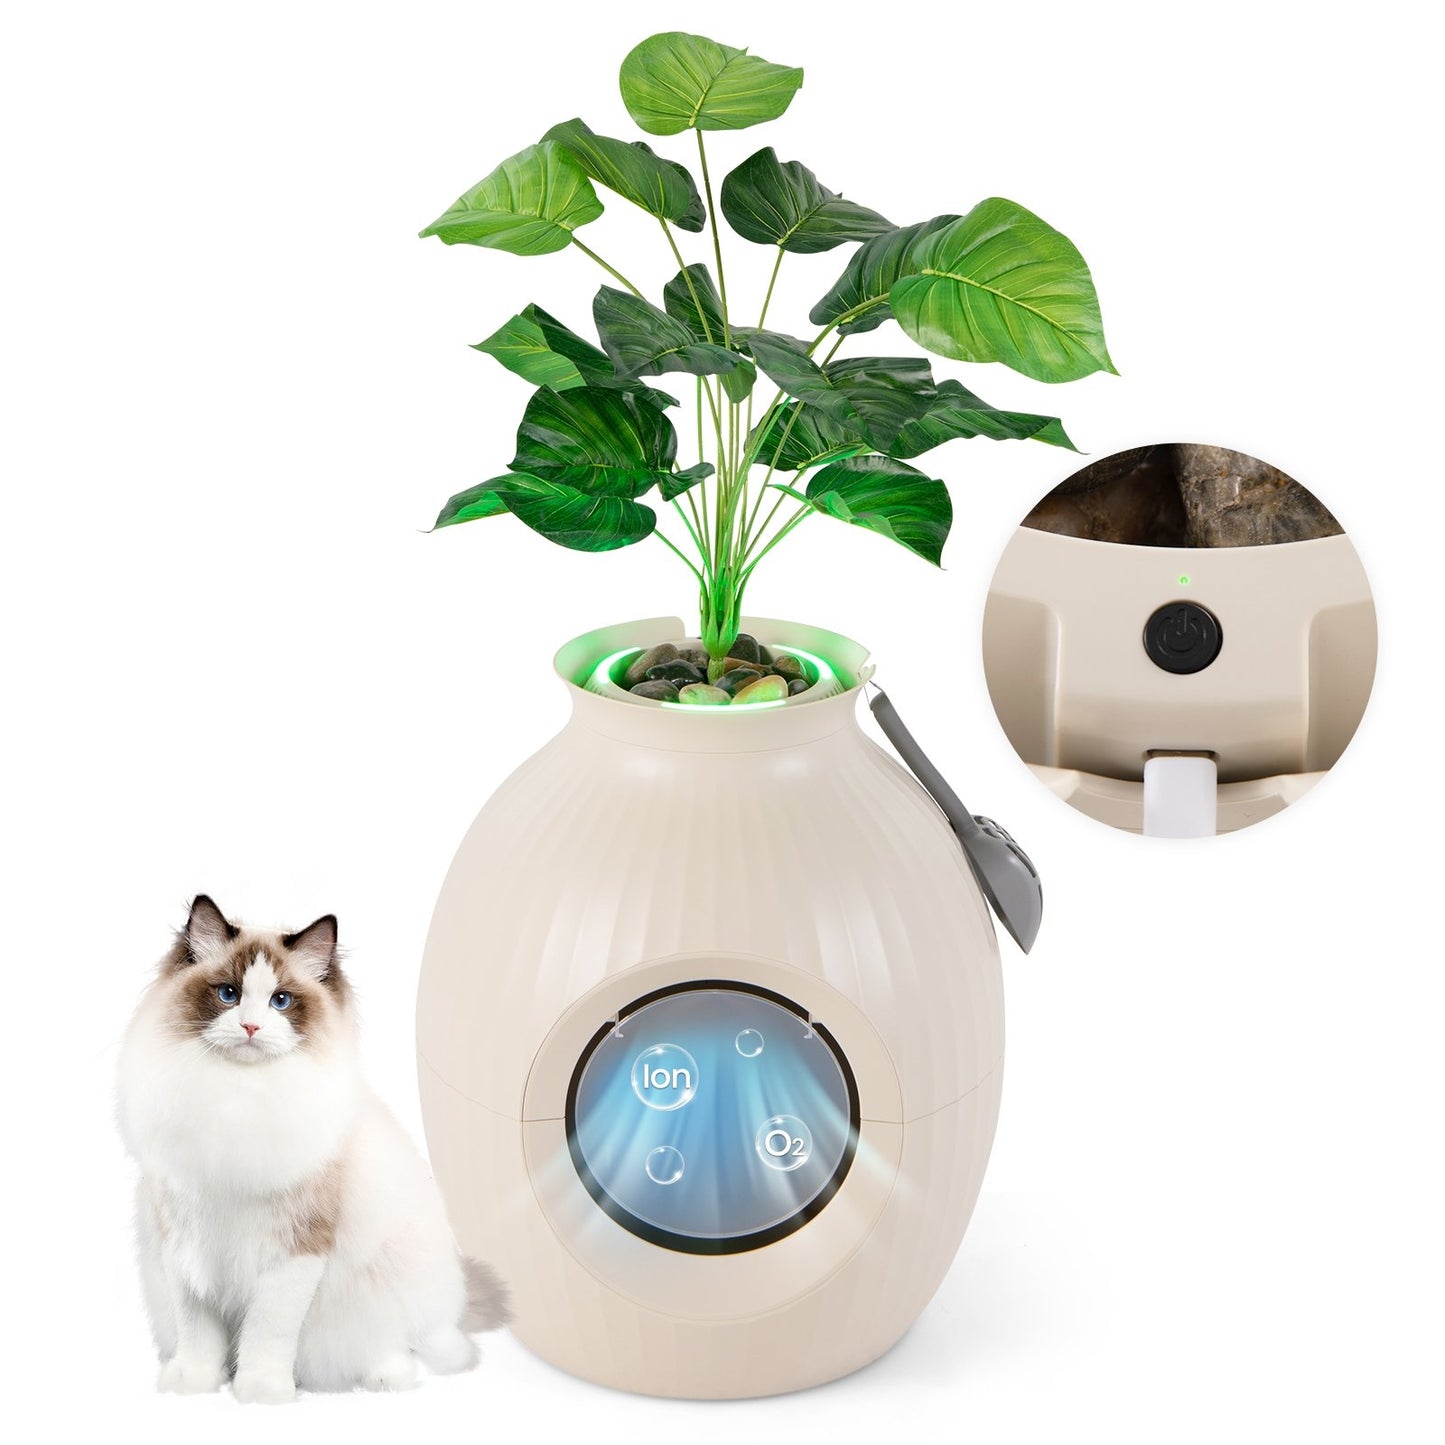 Smart Plant Cat Litter Box with Electronic Odor Removal & Sterilization, Beige